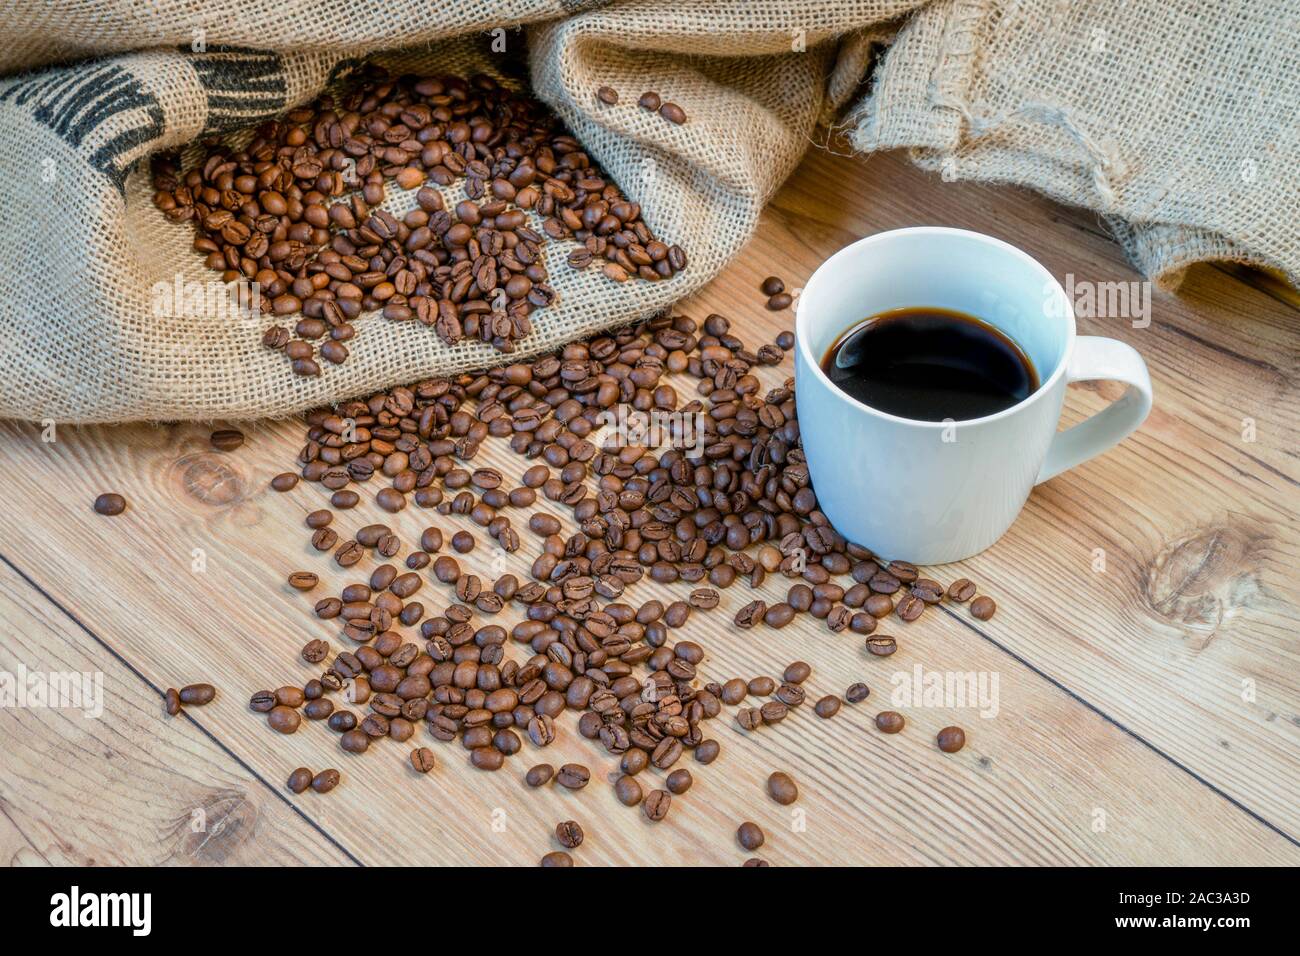 coffee beans on jute sack and printed Brasil on background Stock Photo